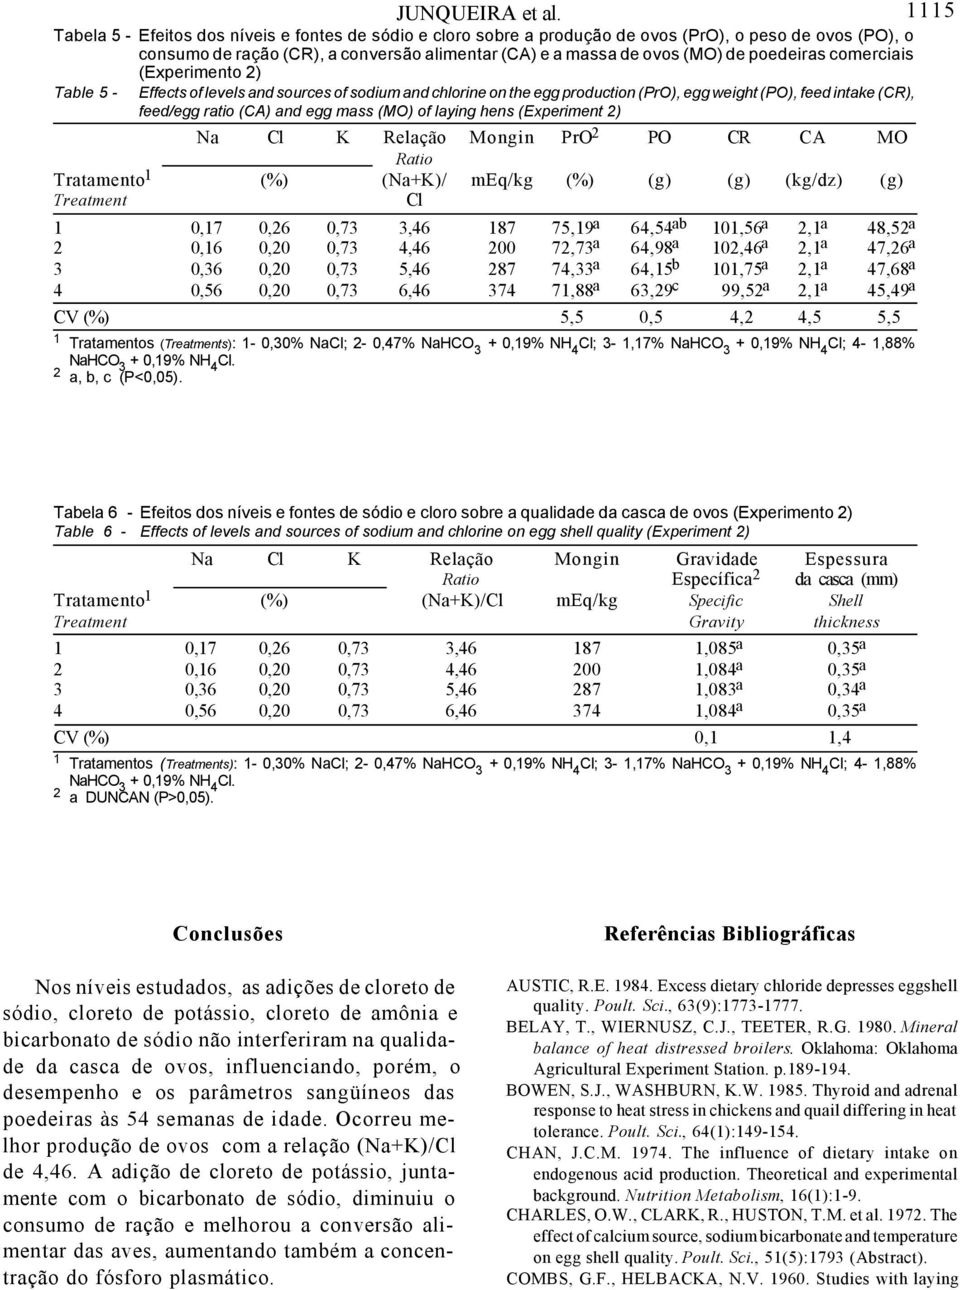 comerciais (Experimento 2) Table 5 - Effects of levels and sources of sodium and chlorine on the egg production (PrO), egg weight (PO), feed intake (CR), feed/egg ratio (CA) and egg mass (MO) of